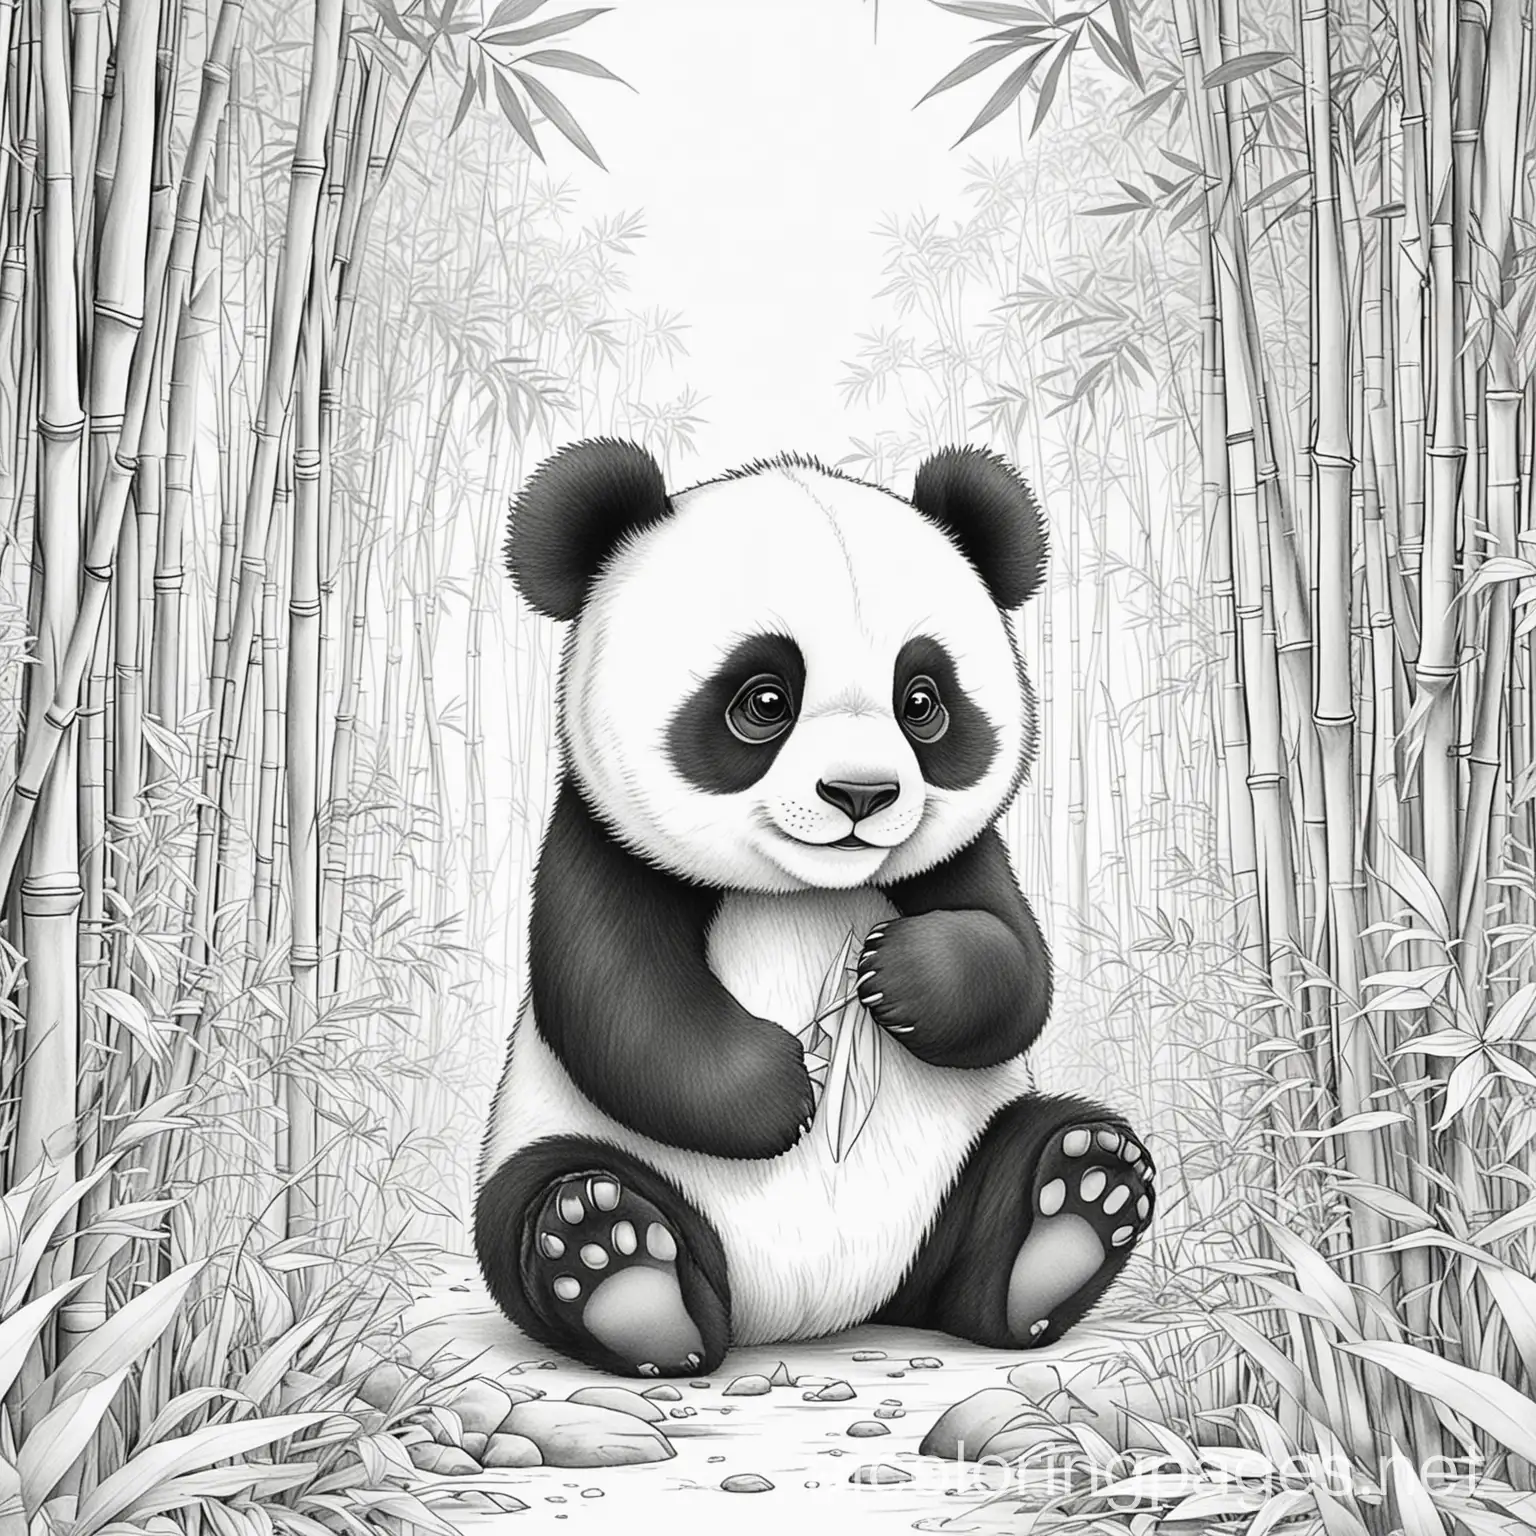 Panda-in-Bamboo-Forest-Coloring-Page-Serene-Wildlife-Scene-for-Relaxing-Coloring